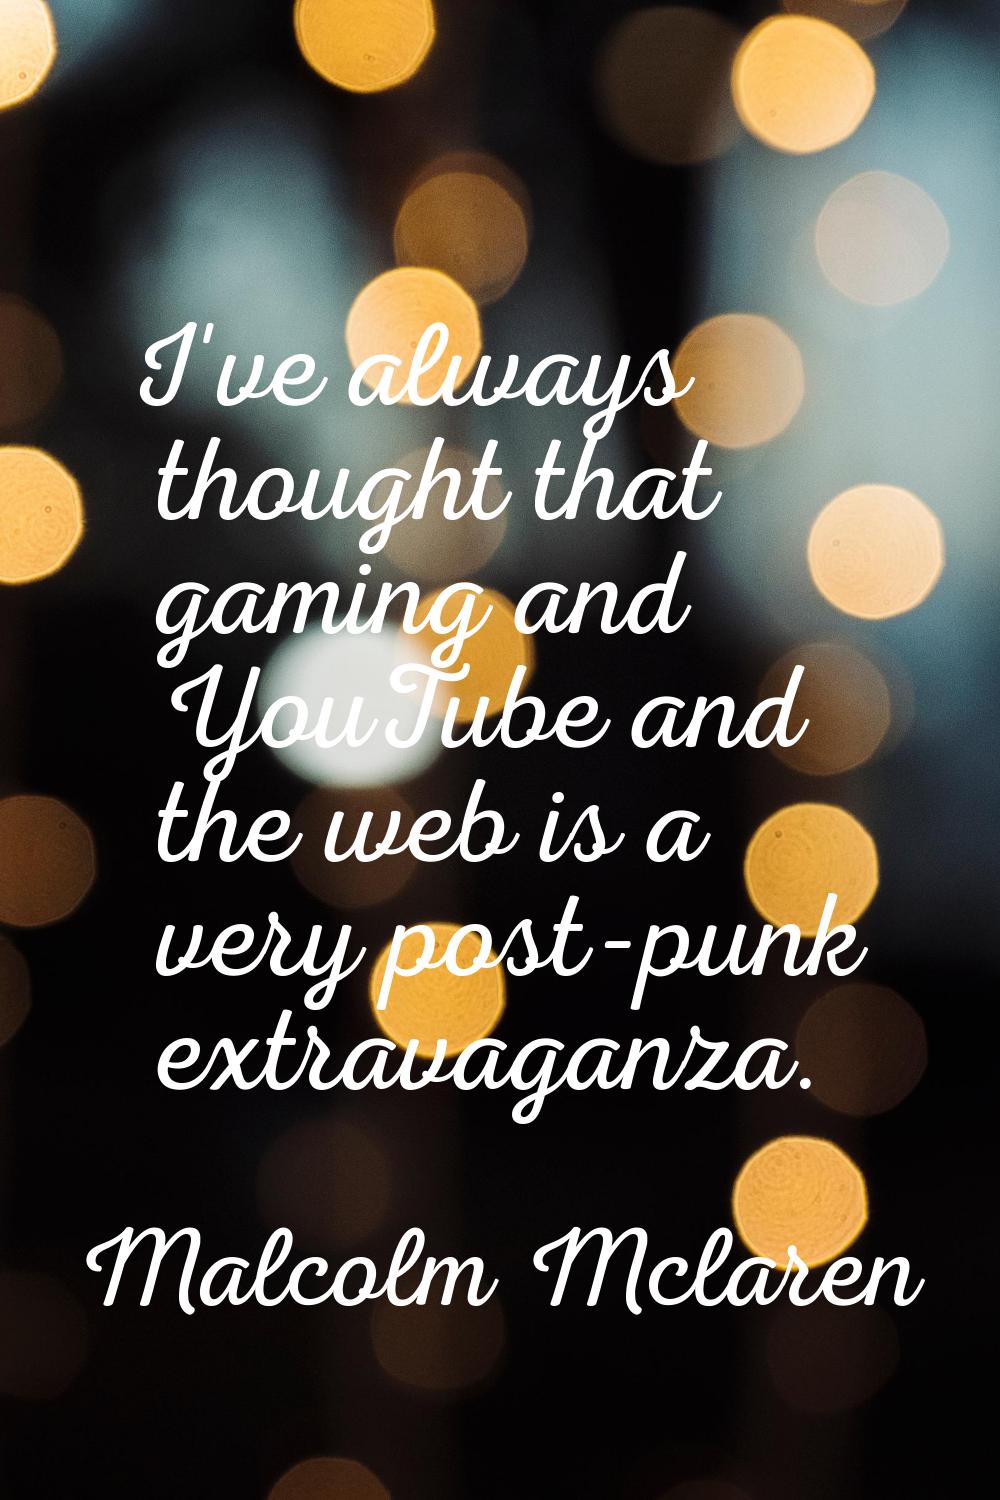 I've always thought that gaming and YouTube and the web is a very post-punk extravaganza.